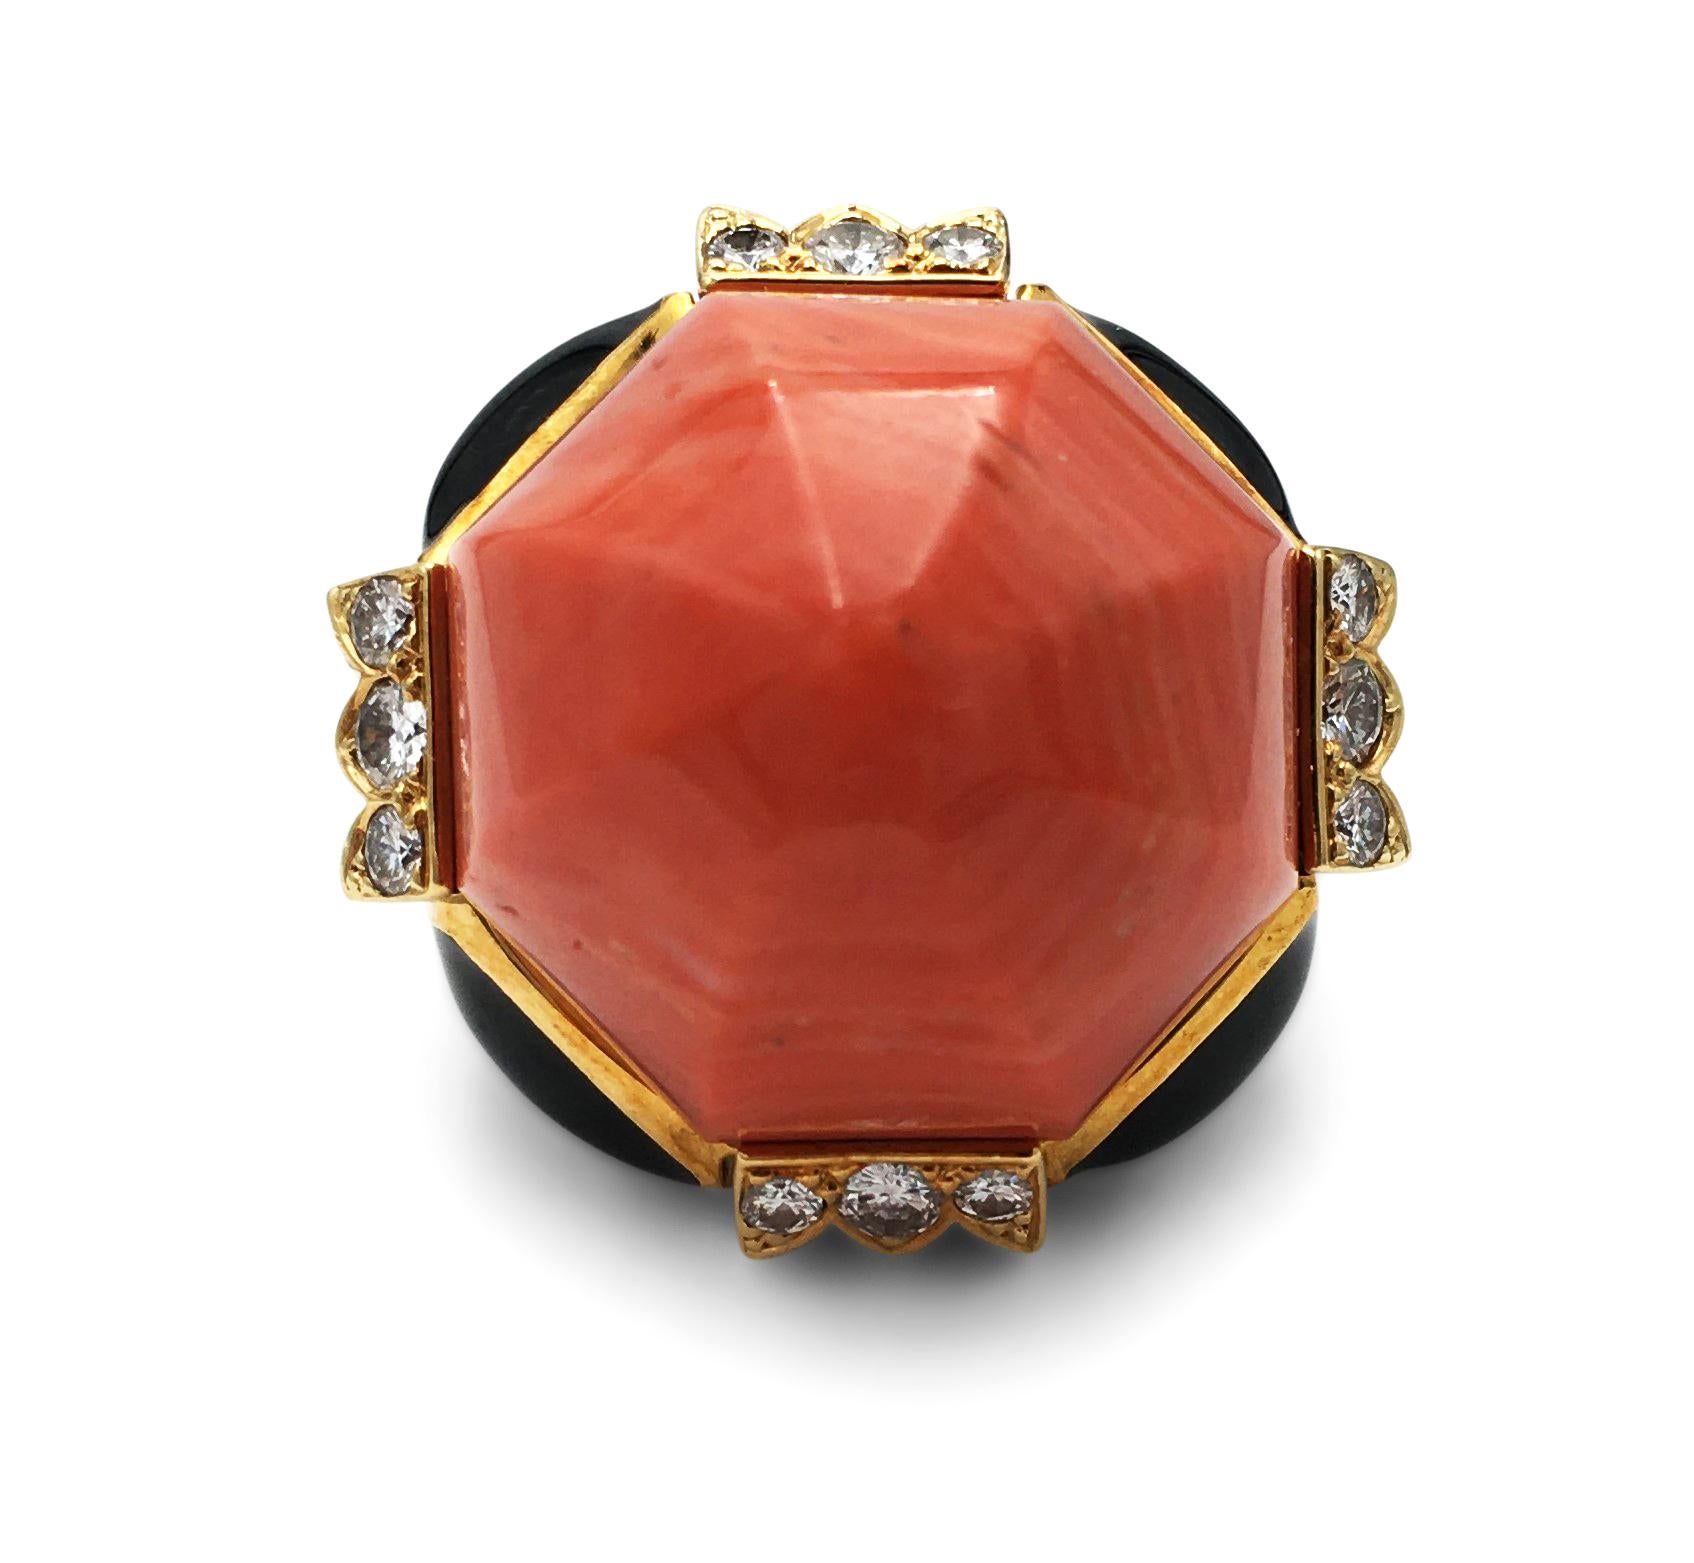 Authentic David Webb cocktail ring centers on a delicious piece of dome shaped carved coral stone flanked by four sections of round cut diamonds weighing an estimated 0.60 carats (E-F color, VS clarity). Contrasting black enamel sections complete